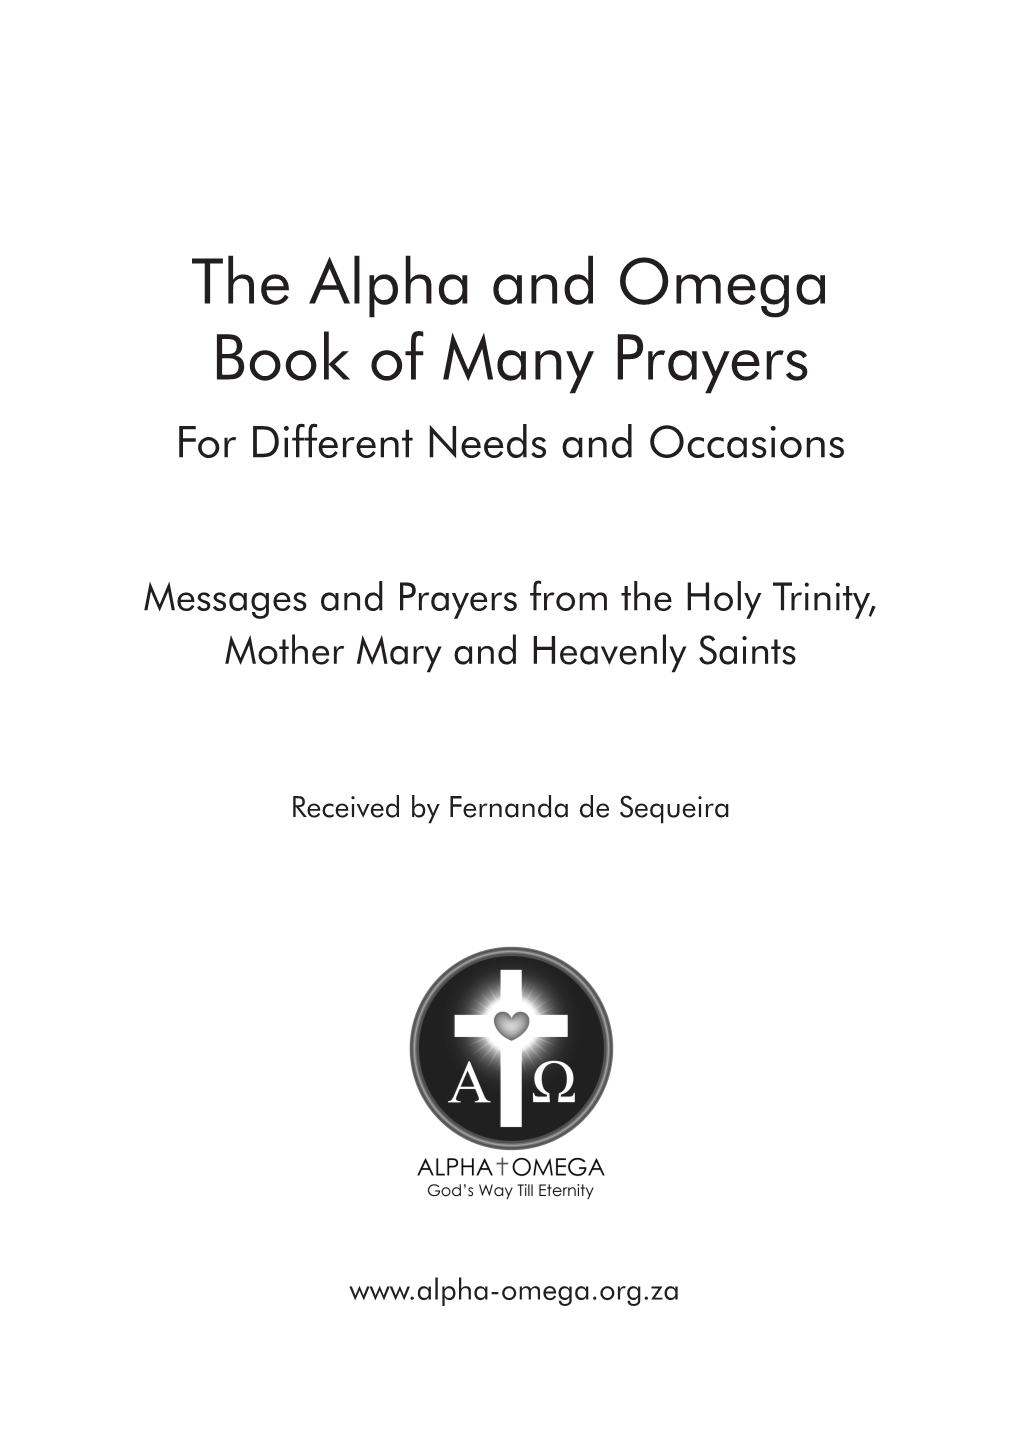 The Alpha and Omega Book of Many Prayers for Different Needs and Occasions